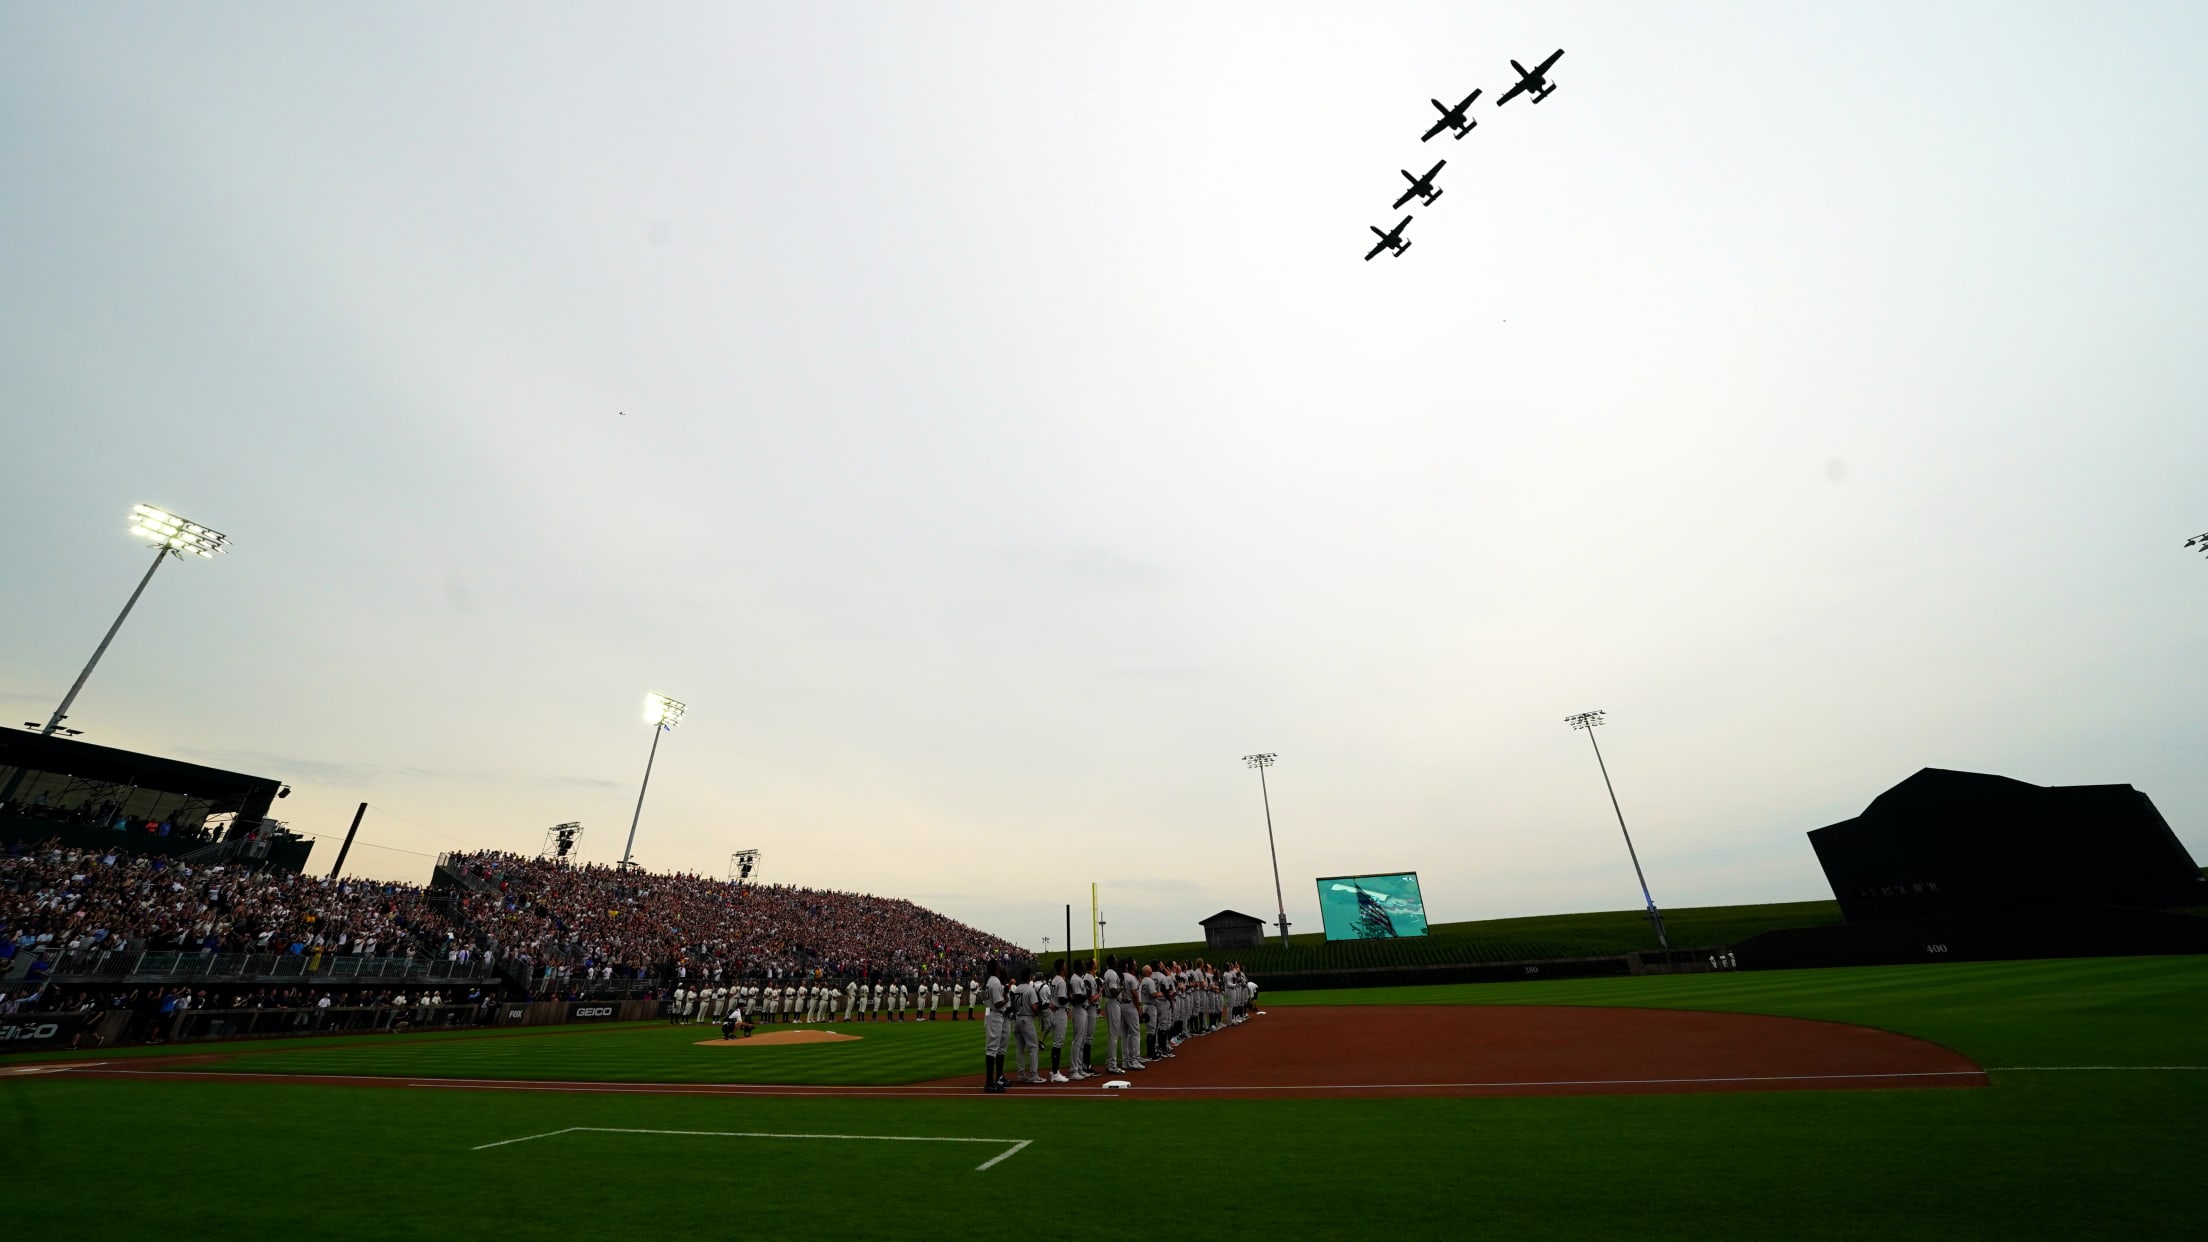 Photos of MLB's Field of Dreams stadium before Yankees-White Sox game